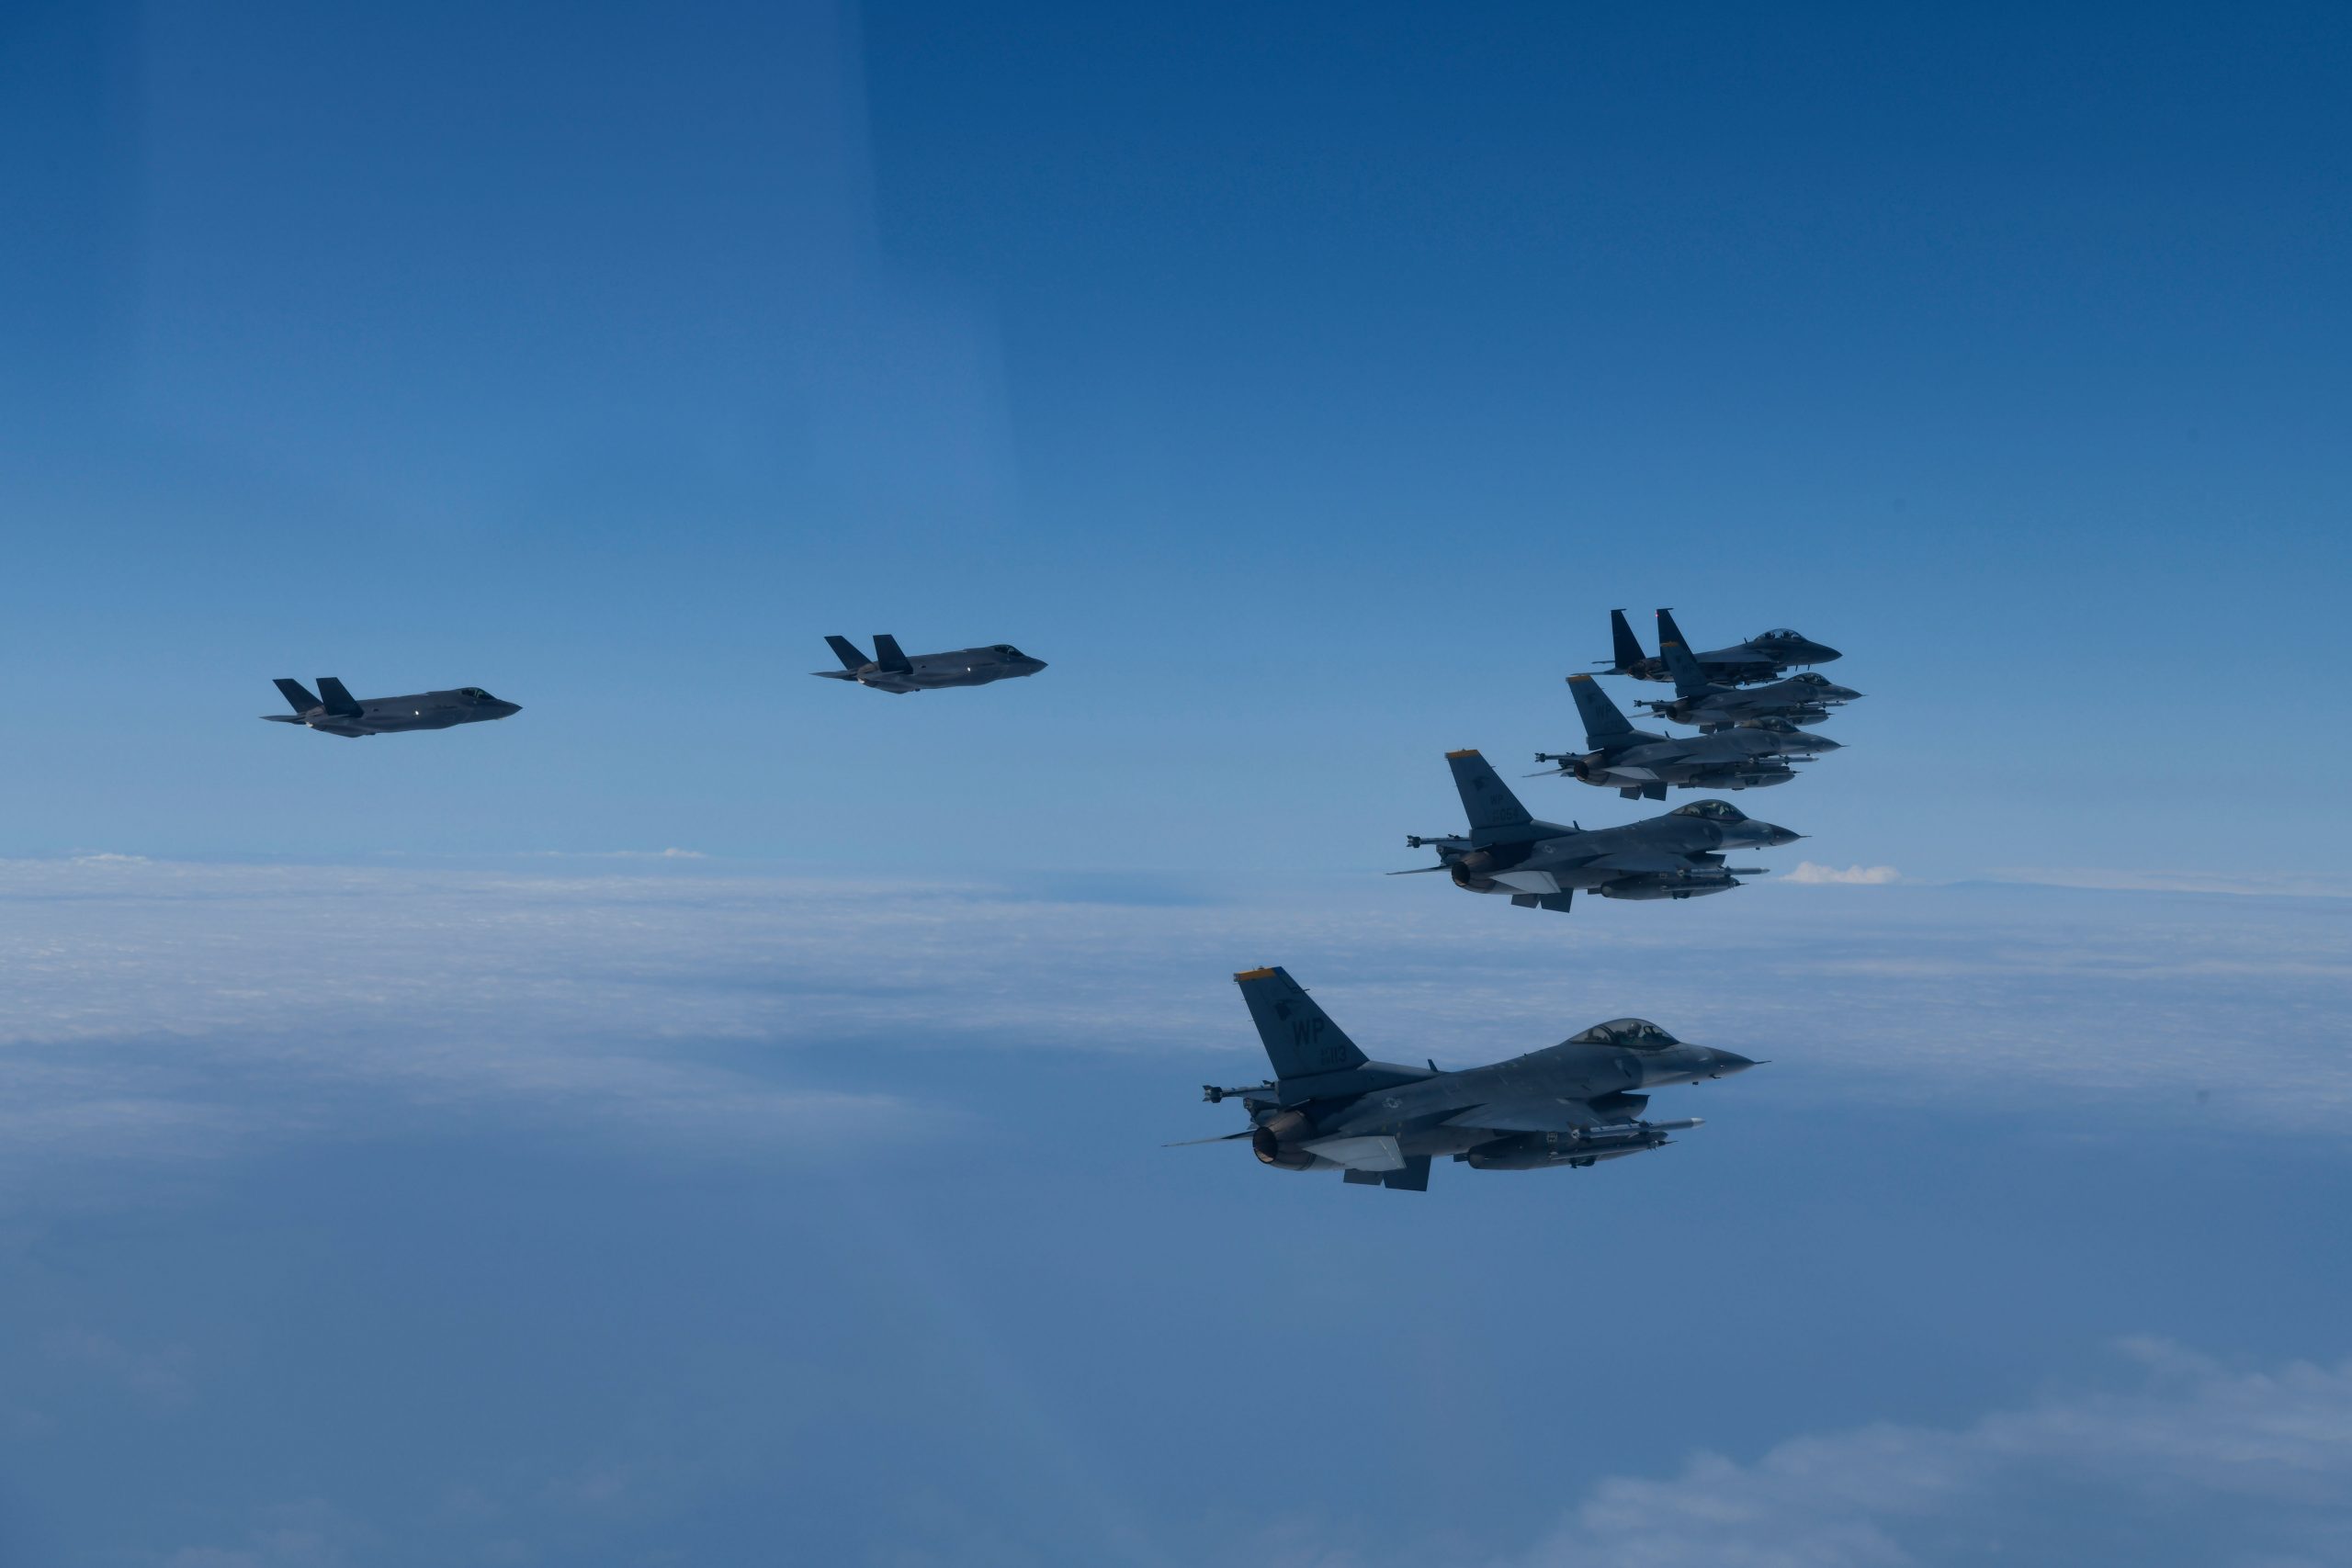 United States, South Korea fly 20 fighter jets amid North Korea tensions